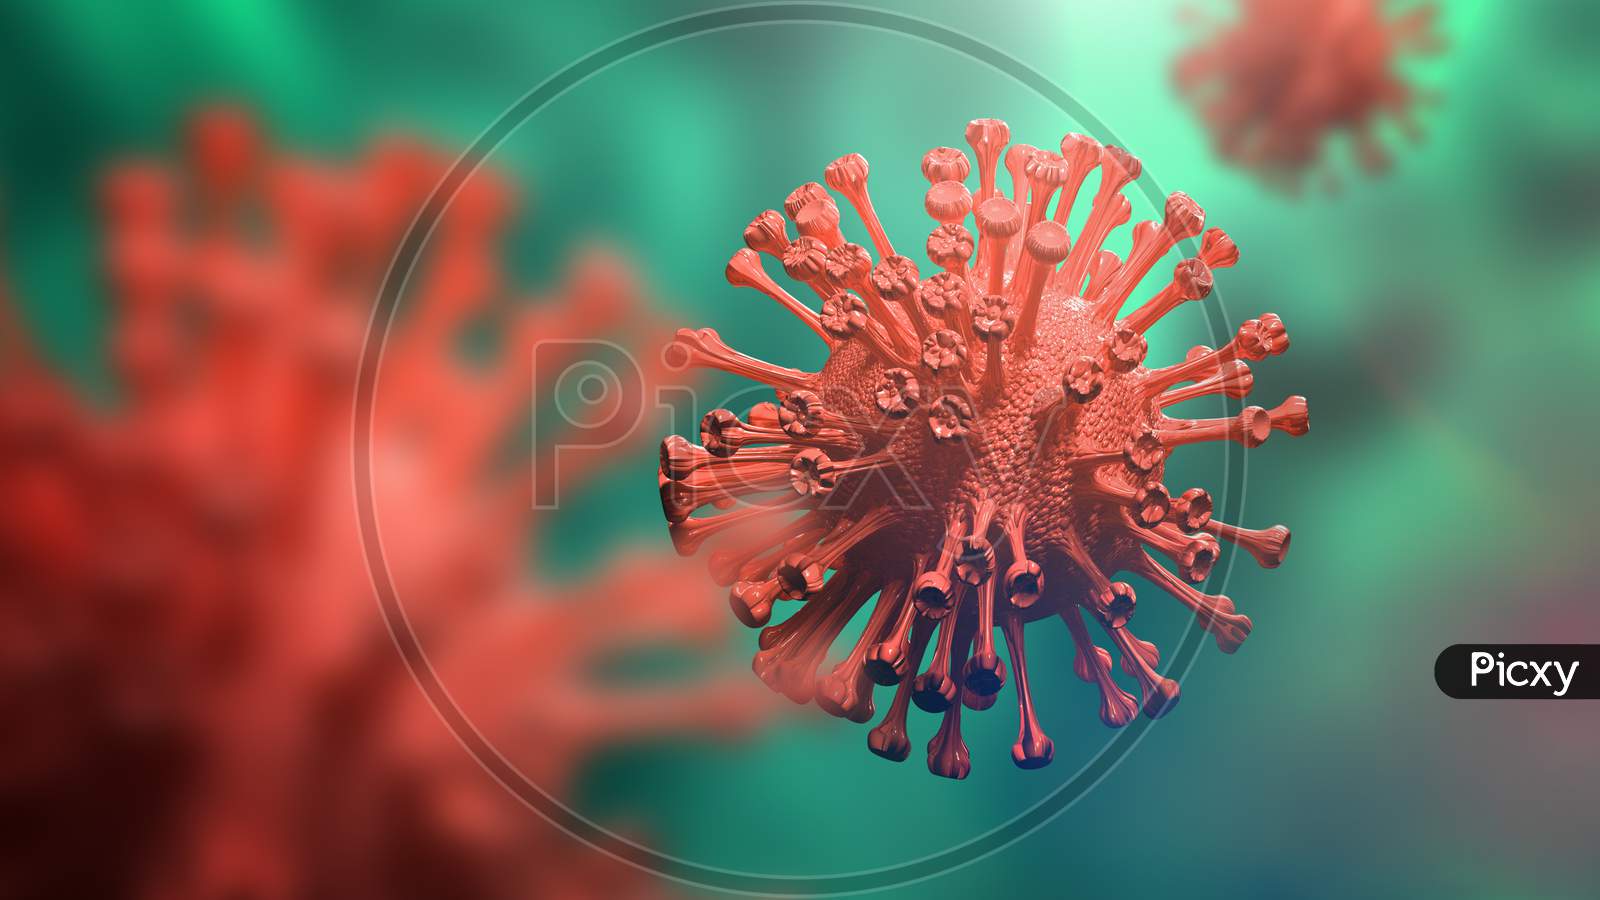 Super Closeup Coronavirus Covid-19 In Human Lung Body Green Background. Science Microbiology Concept. Red Corona Virus Outbreak Epidemic. Medical Health Virology Infection Research. 3D Illustration